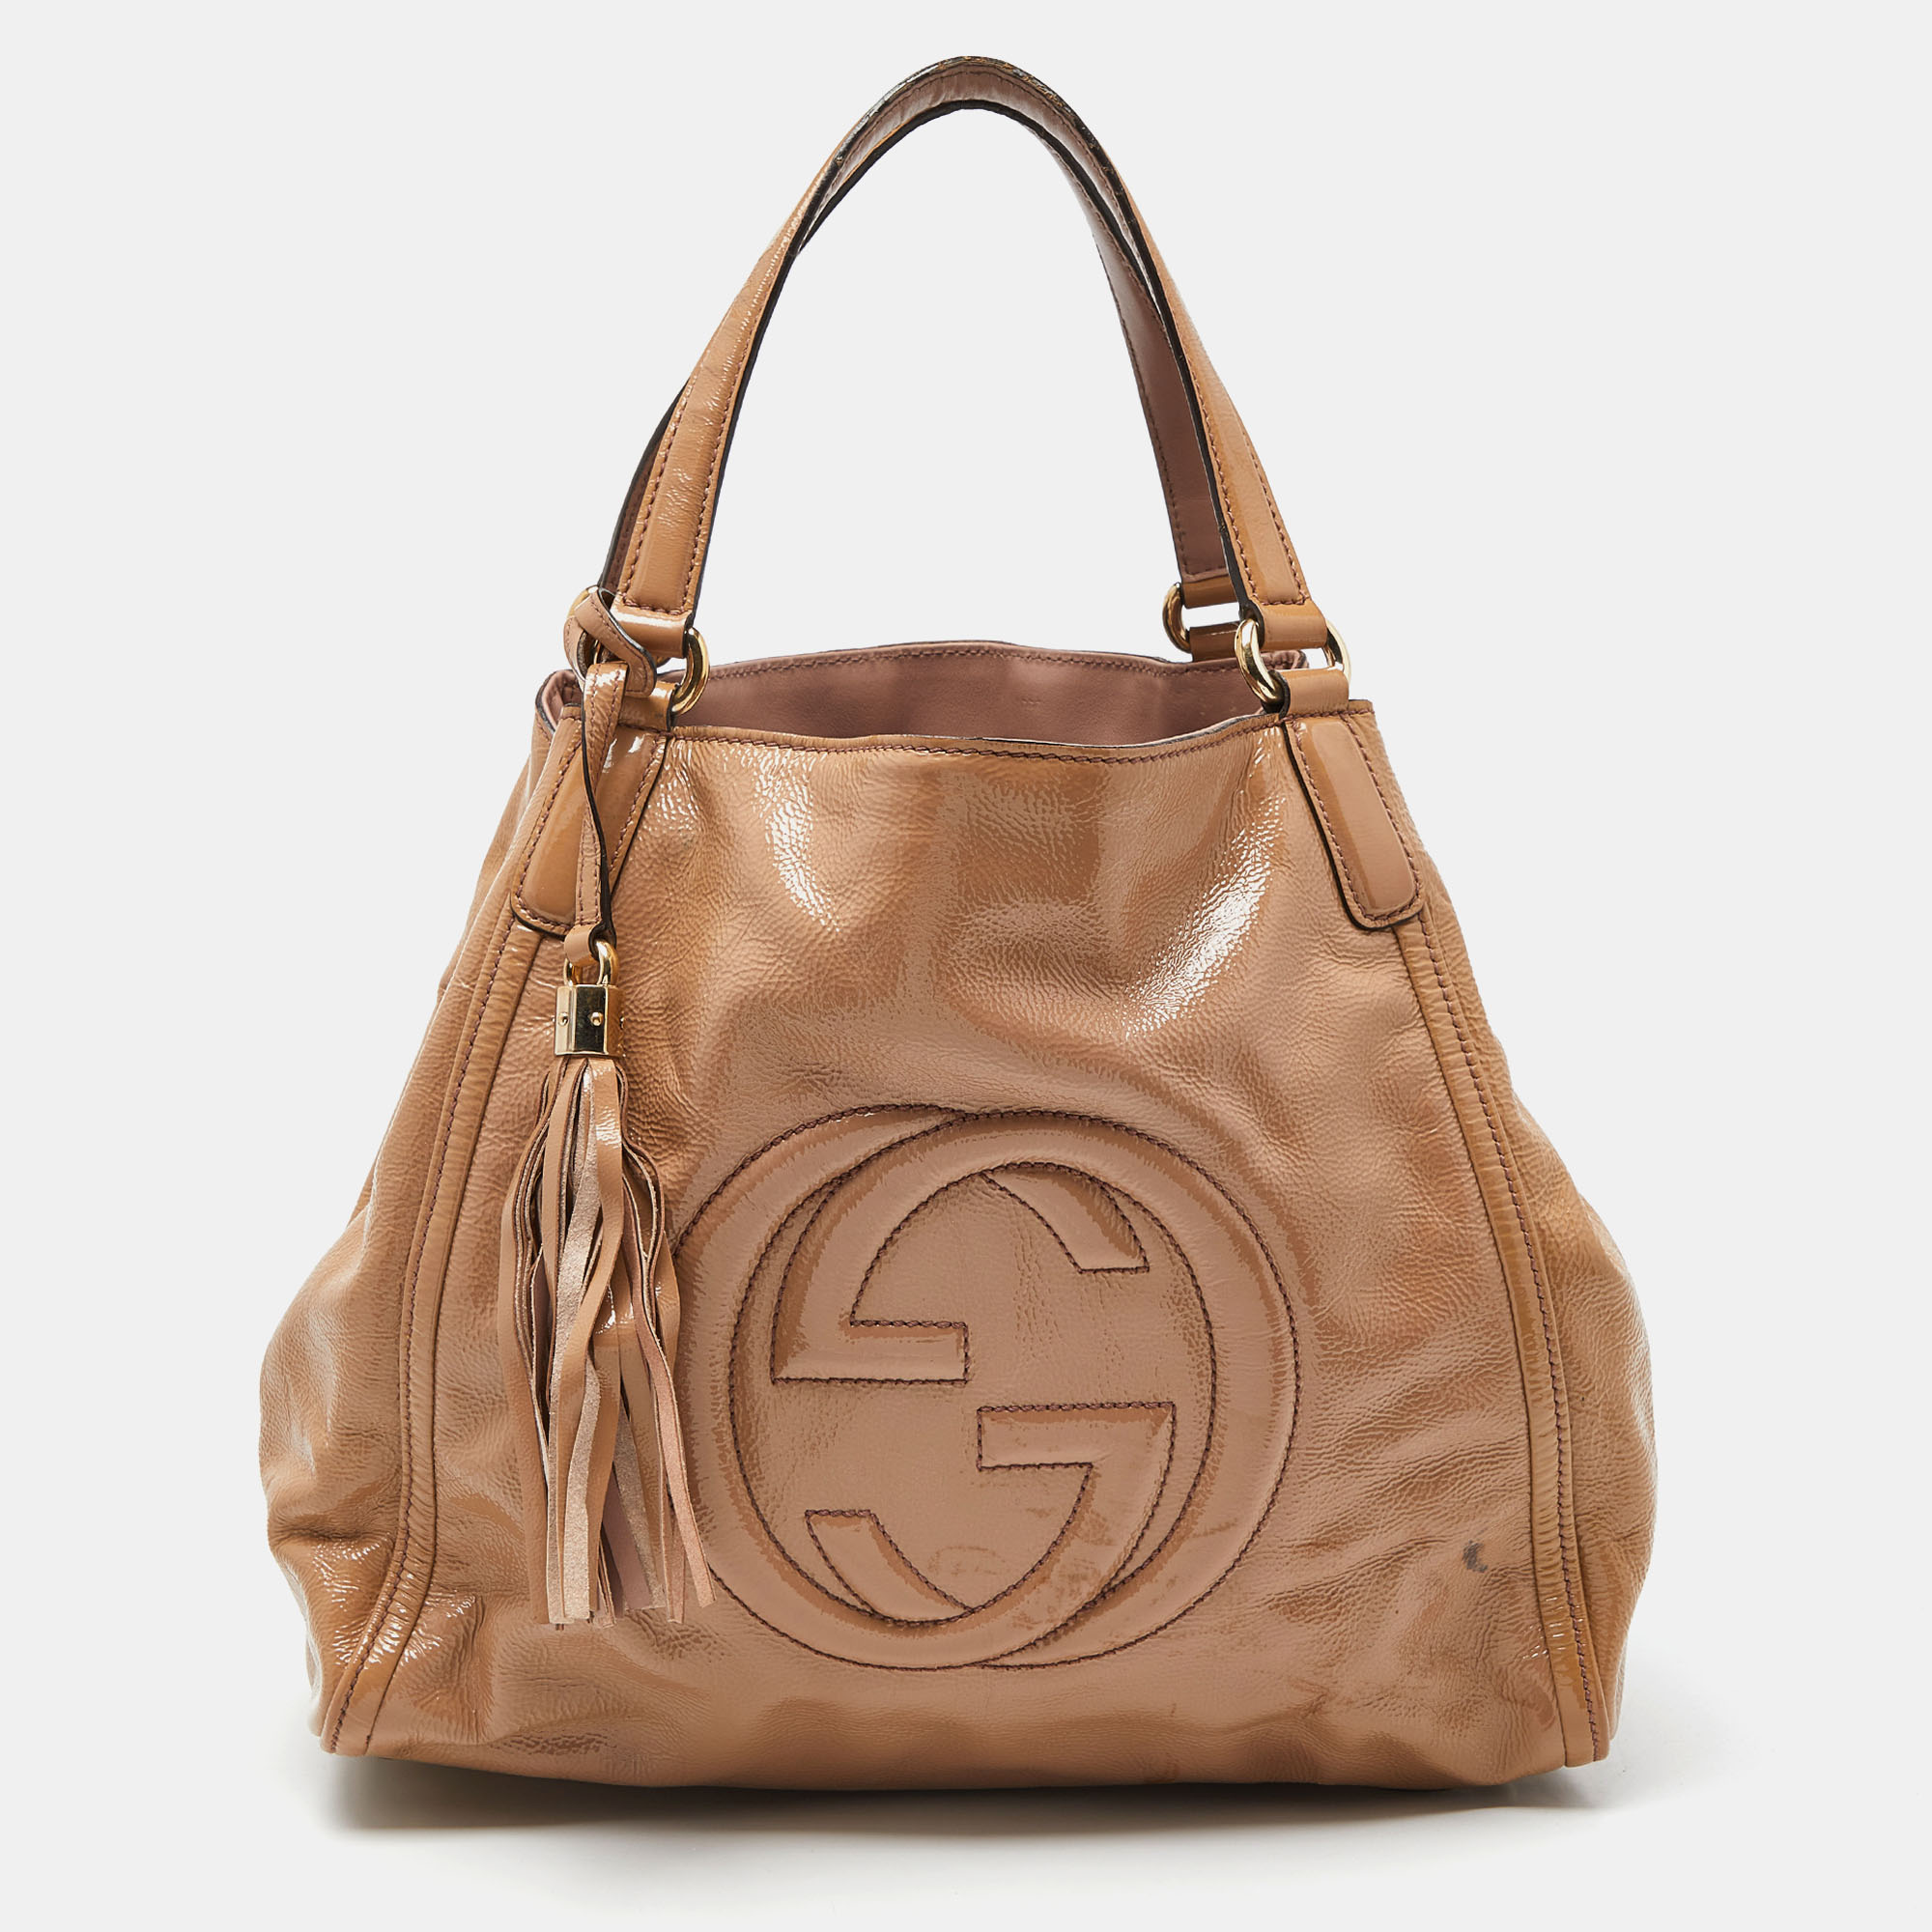 Pre-owned Gucci Beige Patent Leather Small Soho Tote